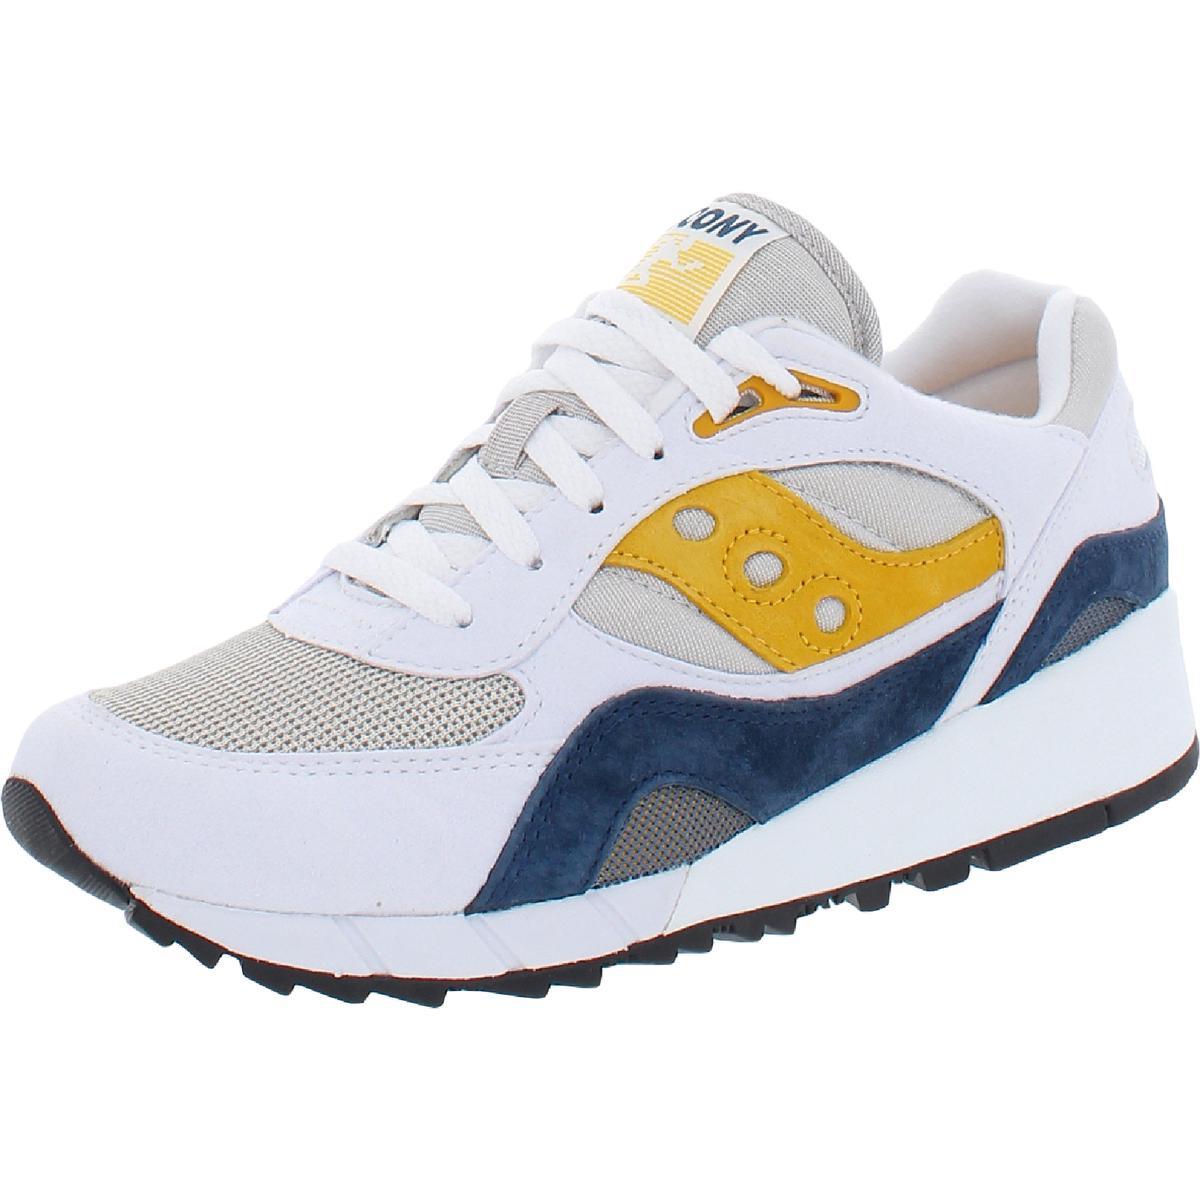 Saucony Men`s Shadow 6000 Leather Retro Inspired Athletic Fashion Sneaker White/Gold